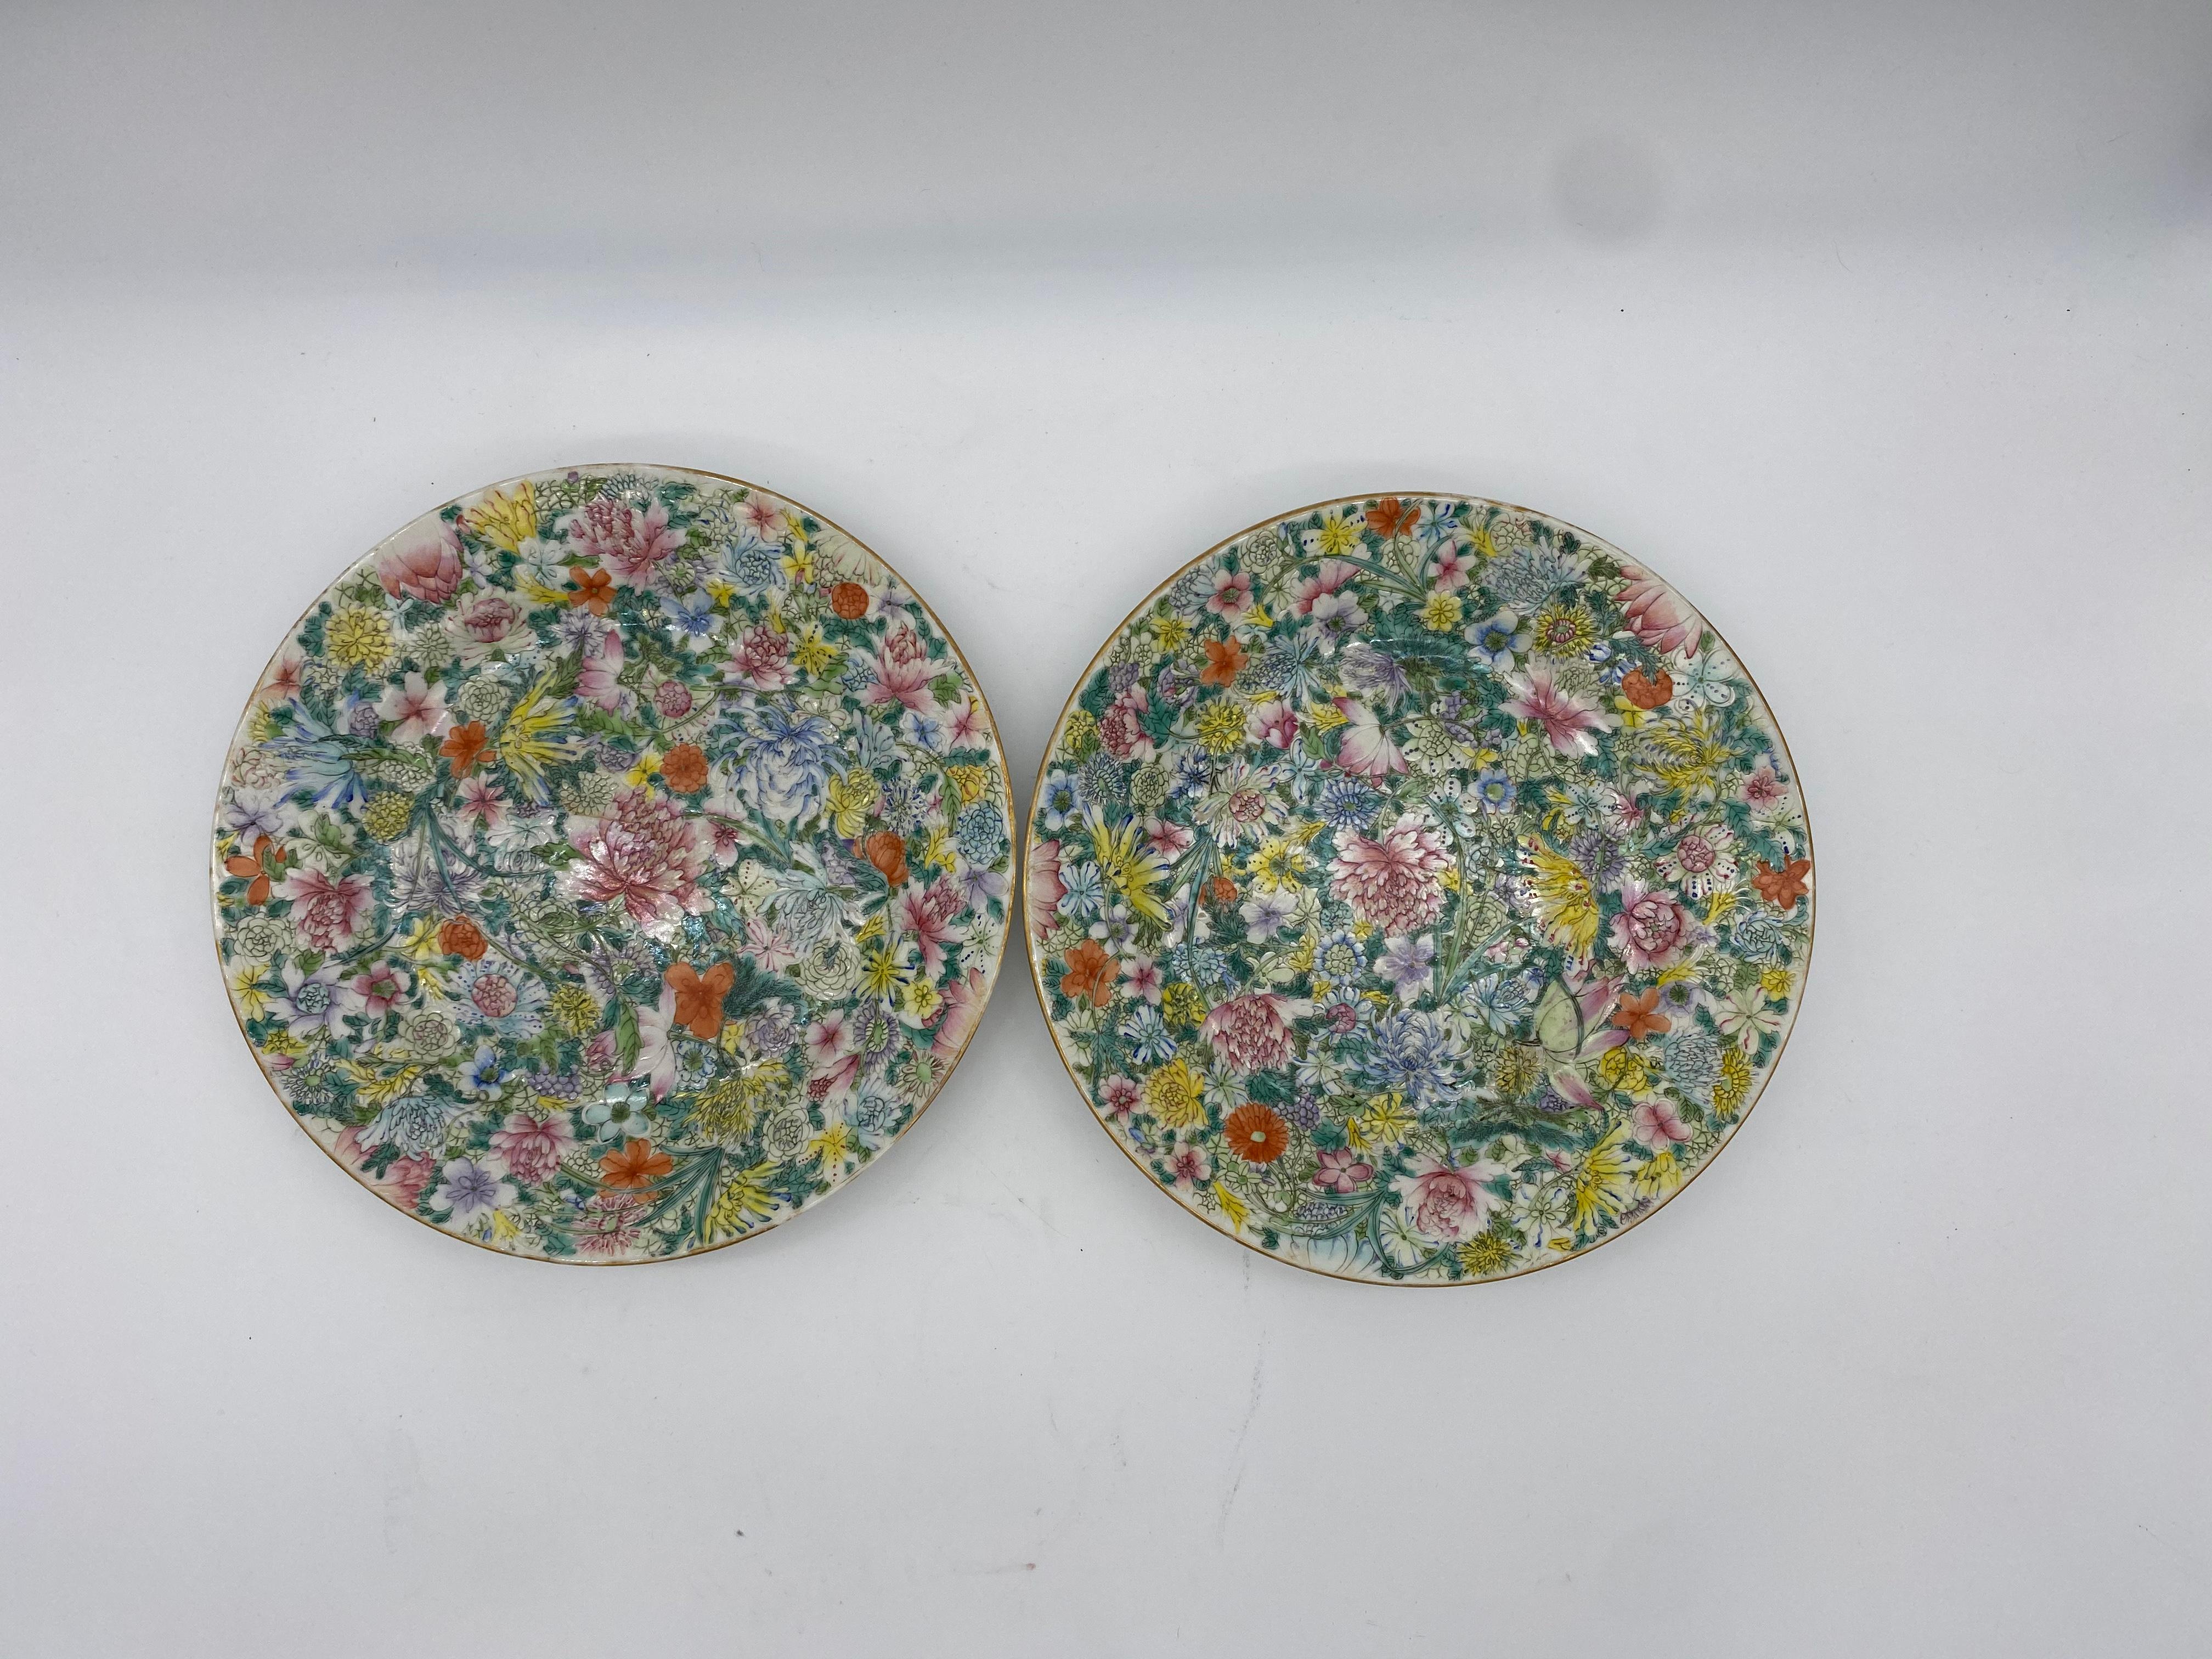 A pair of 19th century Chinese flower-blossom porcelain plates, the base marked with red Daqing GuangXu NianZhi, heights 1.5 inch, opening diameter 9.5 inch.